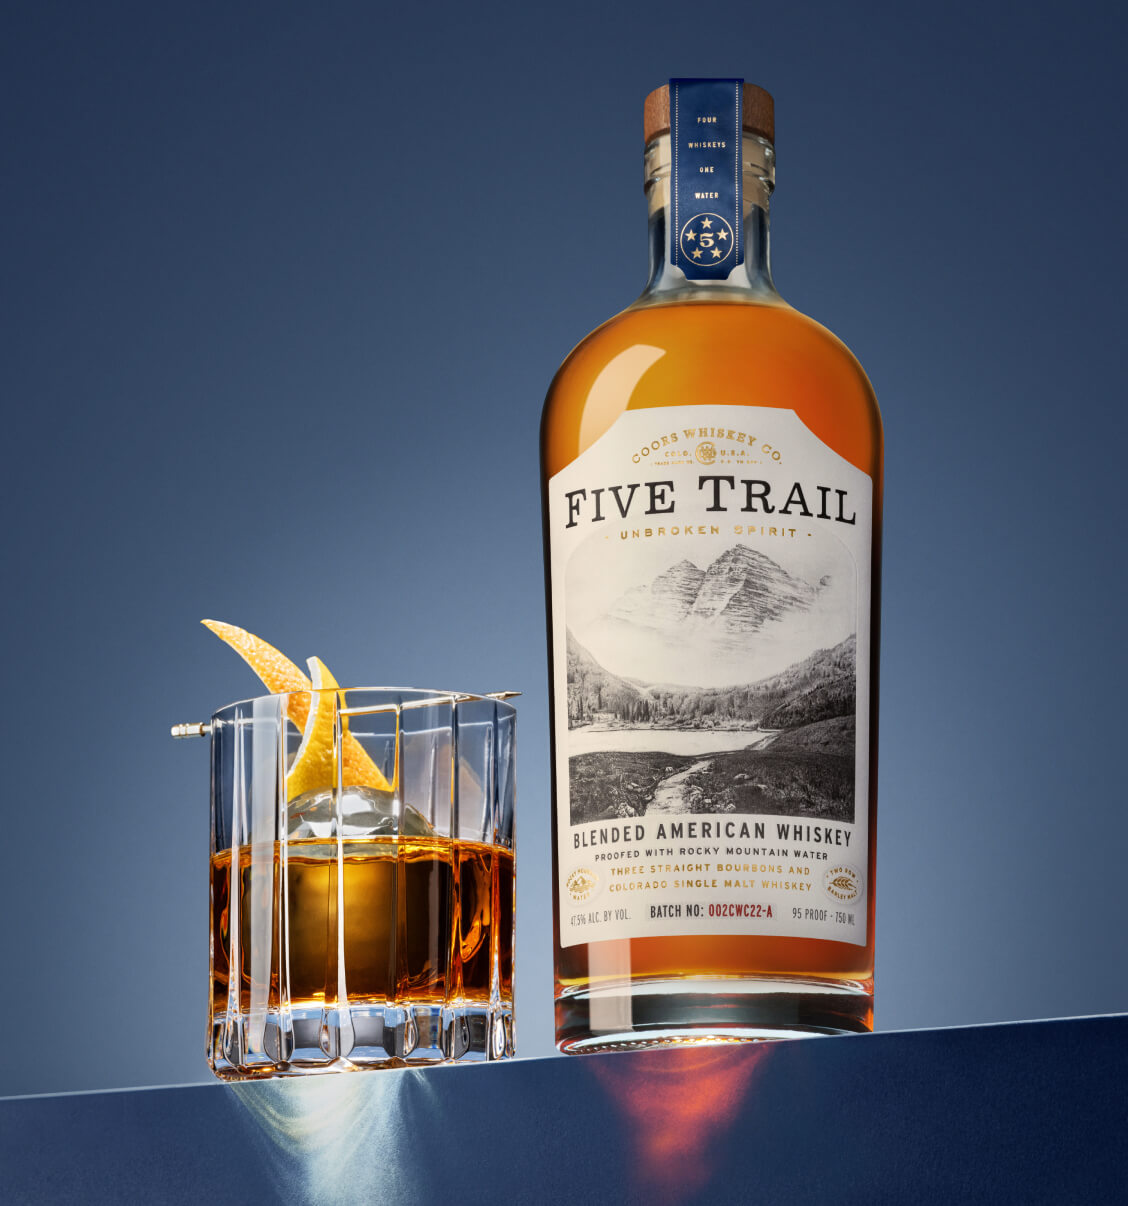 five trail bottle and glass of whiskey